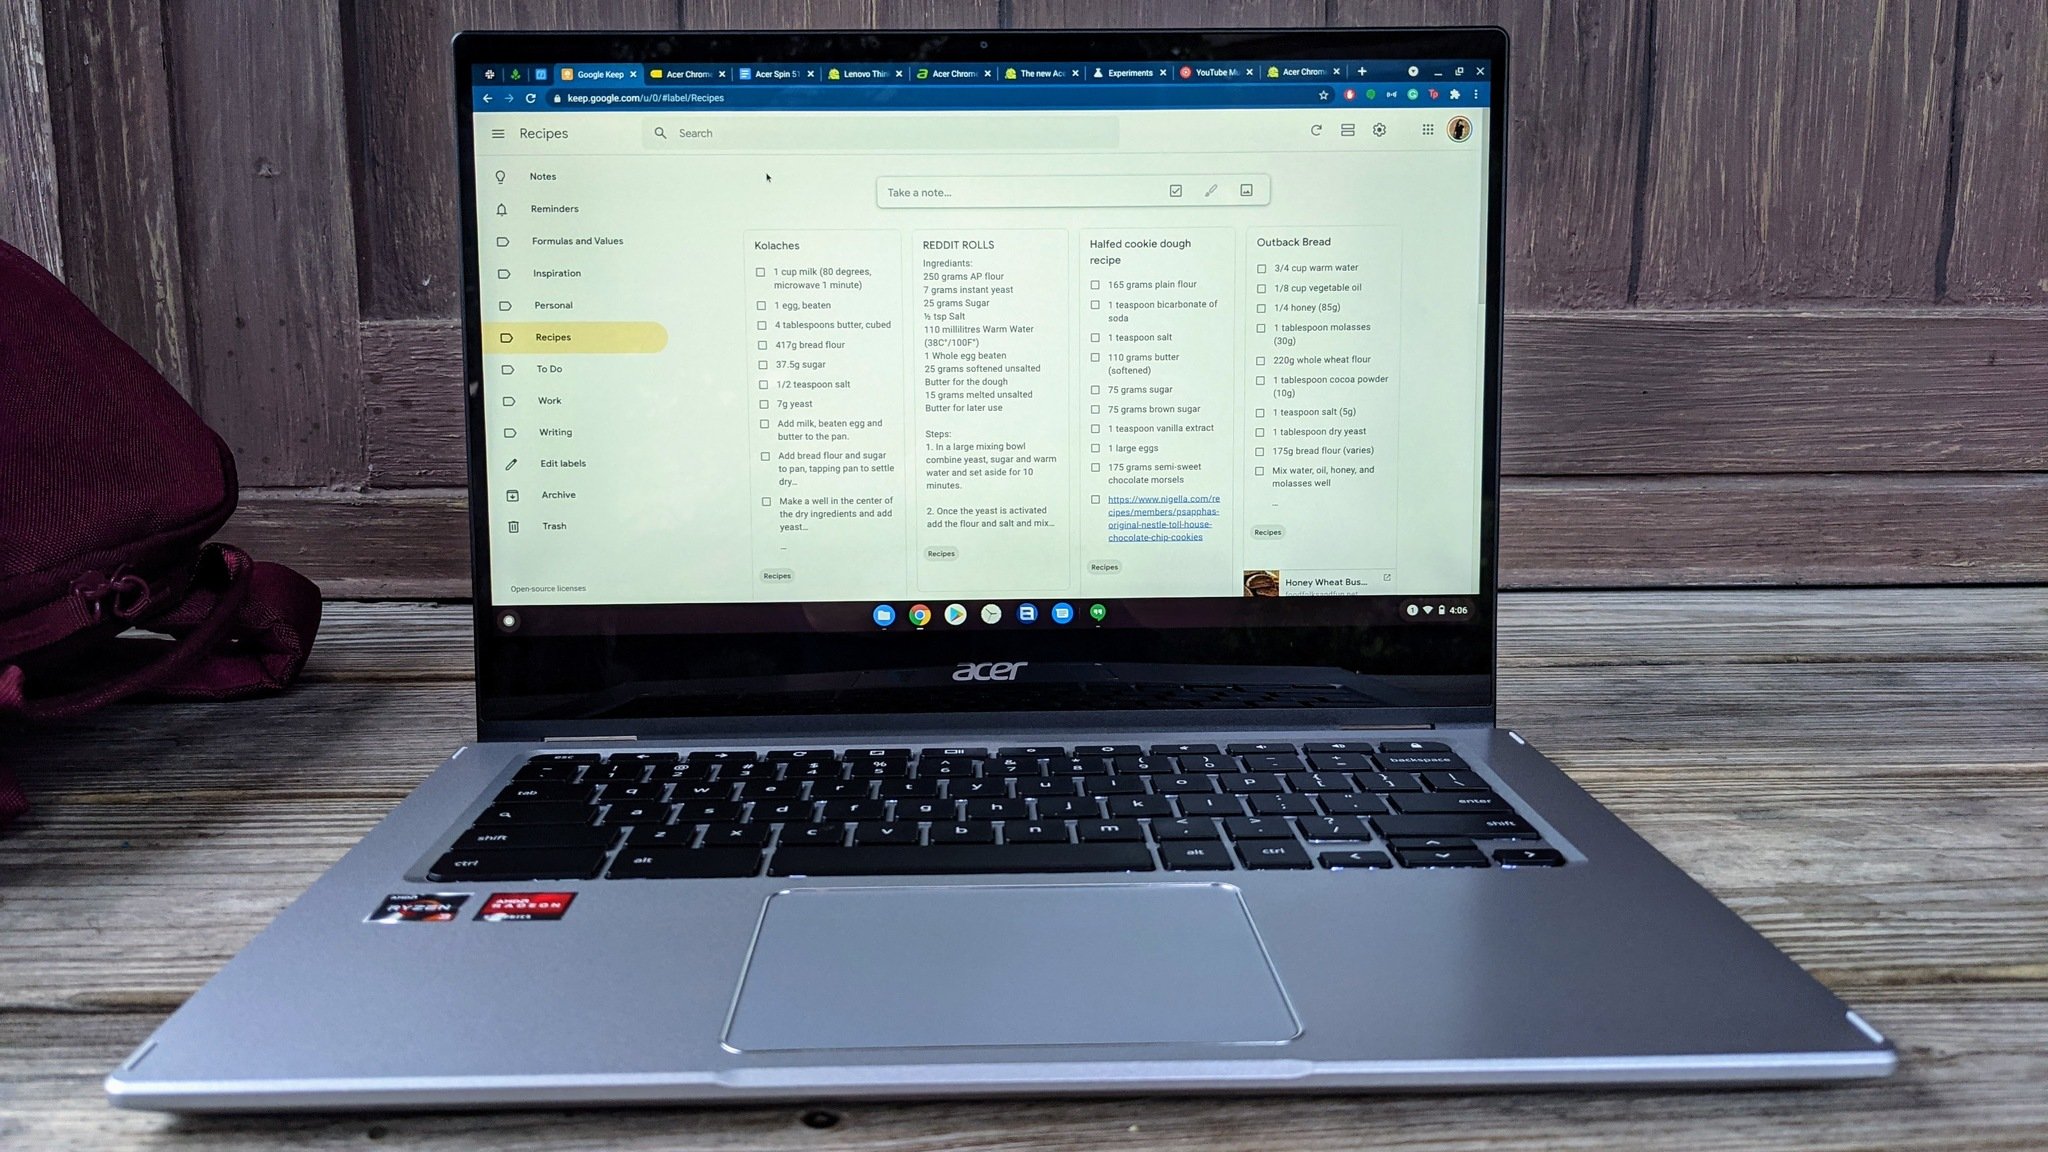 Google Keep on the Acer Chromebook Spin 514